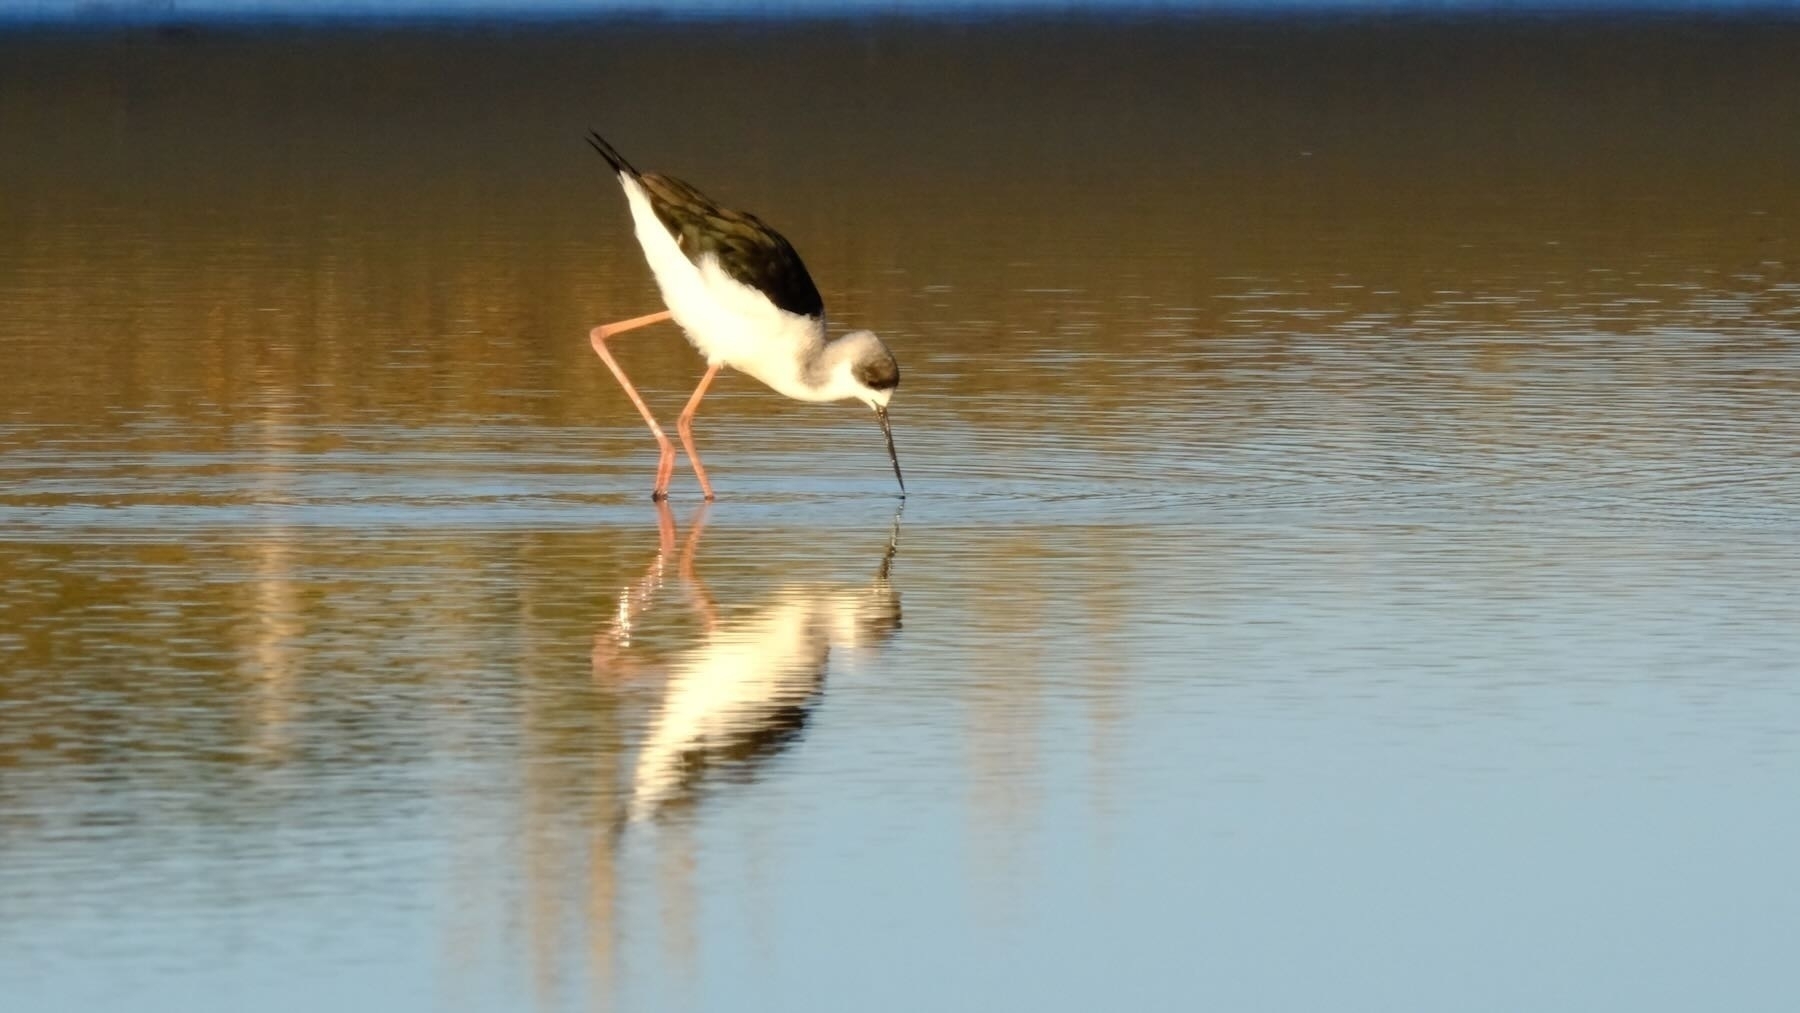 Pied stilt with reflection.